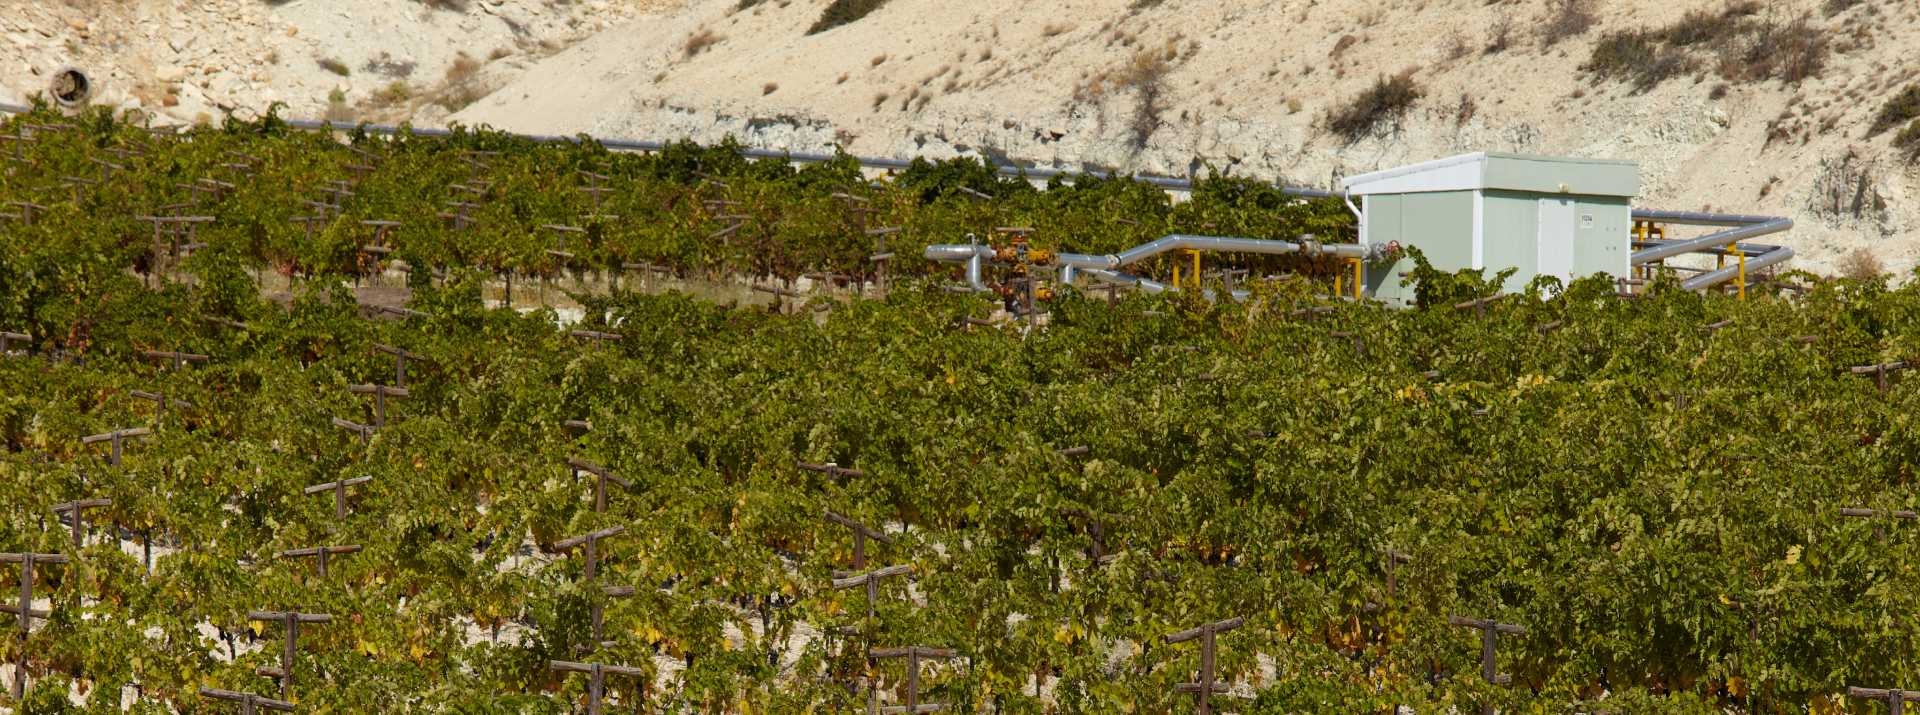 A solution extraction well-head amongst vineyards at Eti